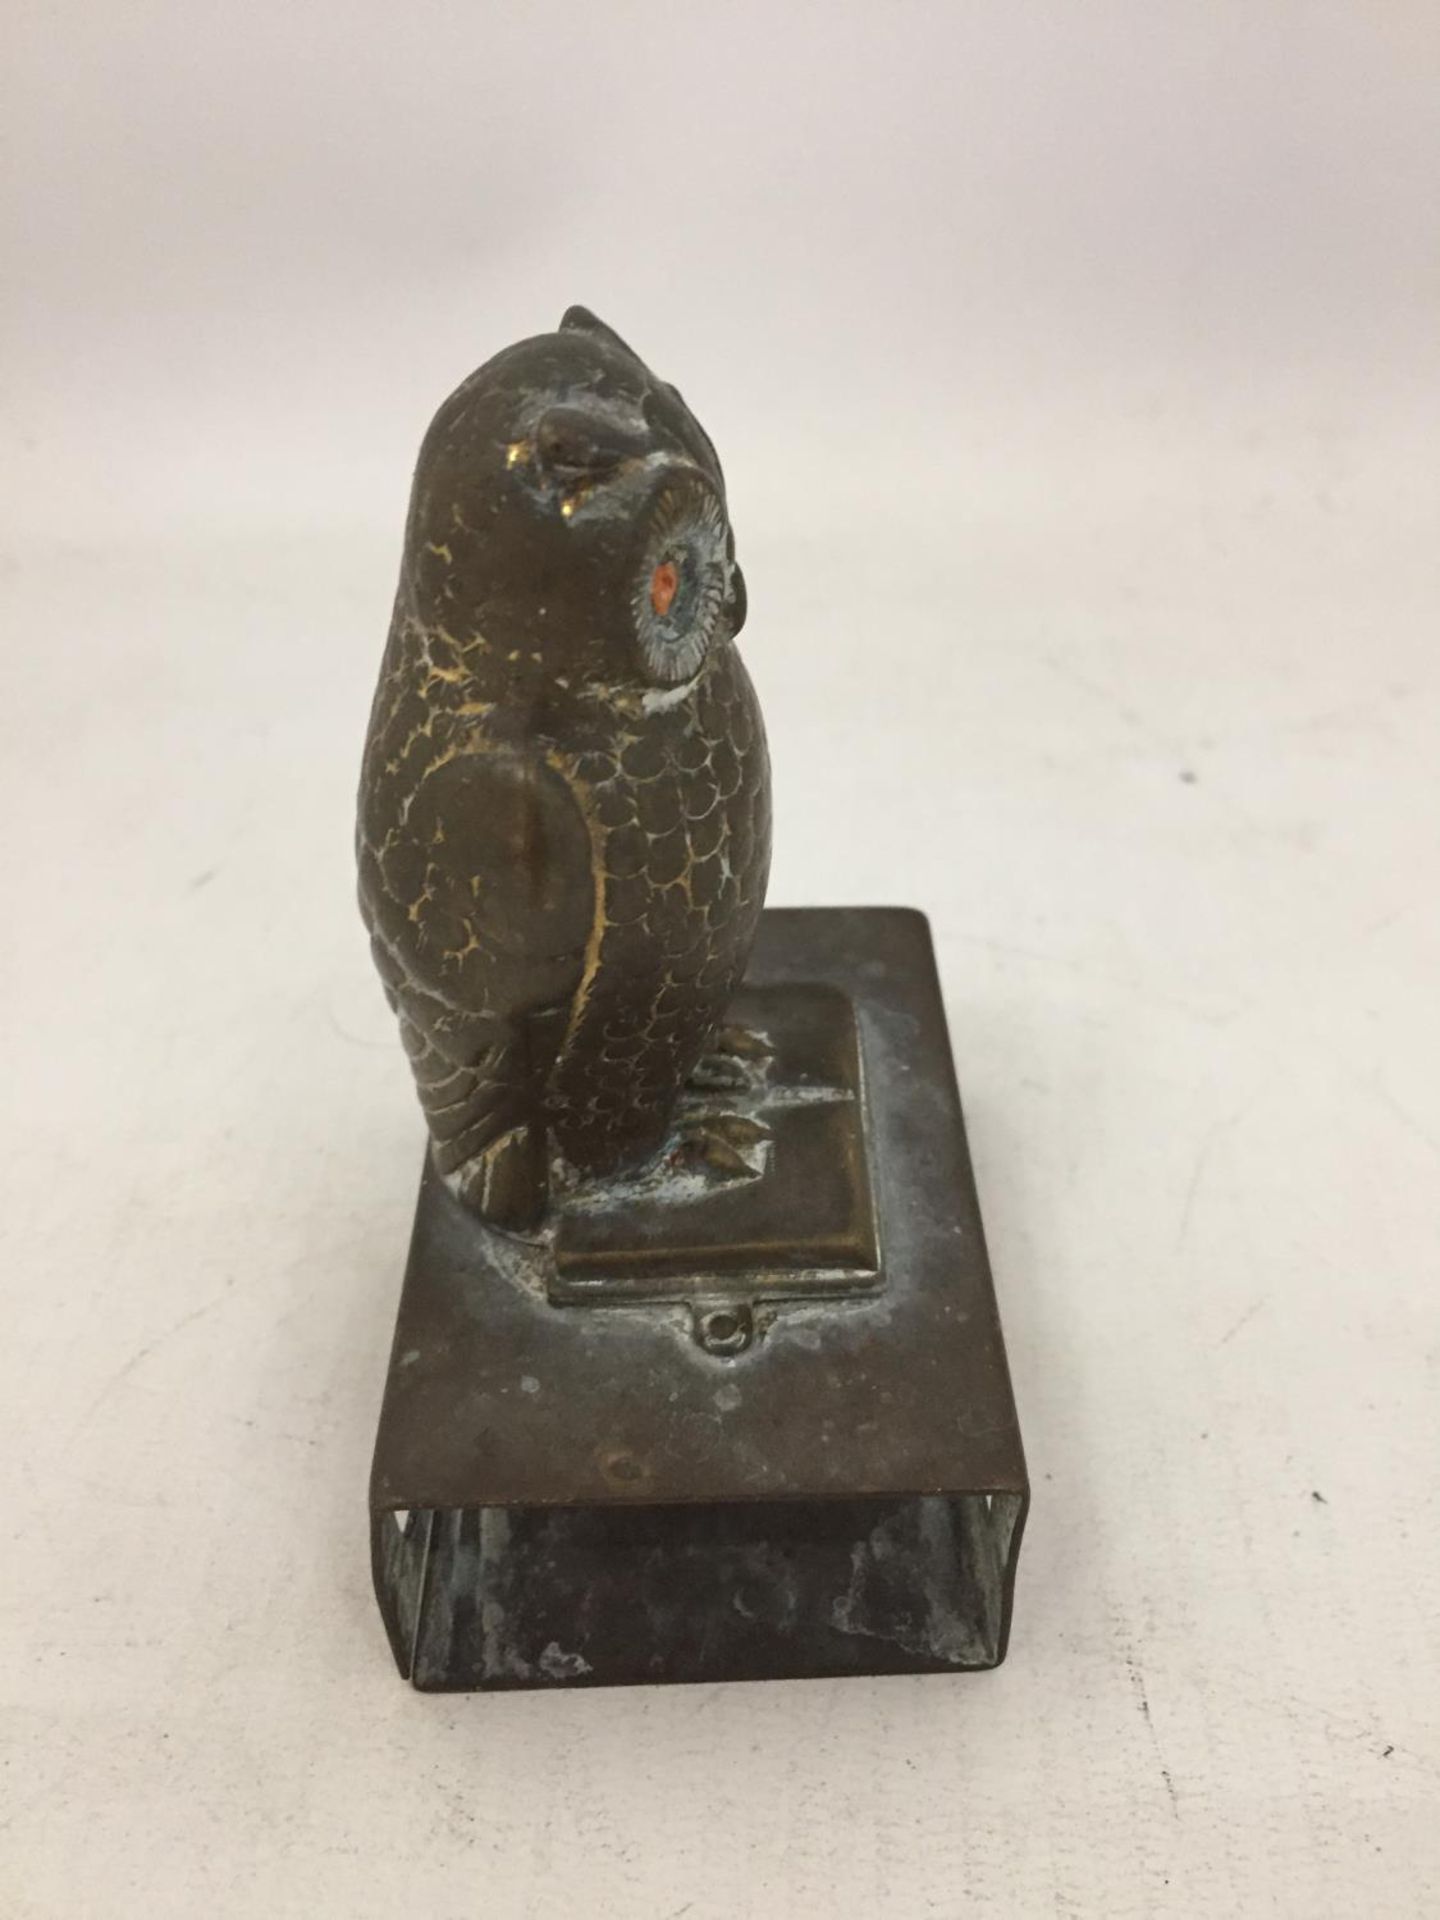 A VINTAGE BRASS MATCHBOX HOLDER WITH A BRASS OWL FIGURE ON TOP - Image 3 of 3